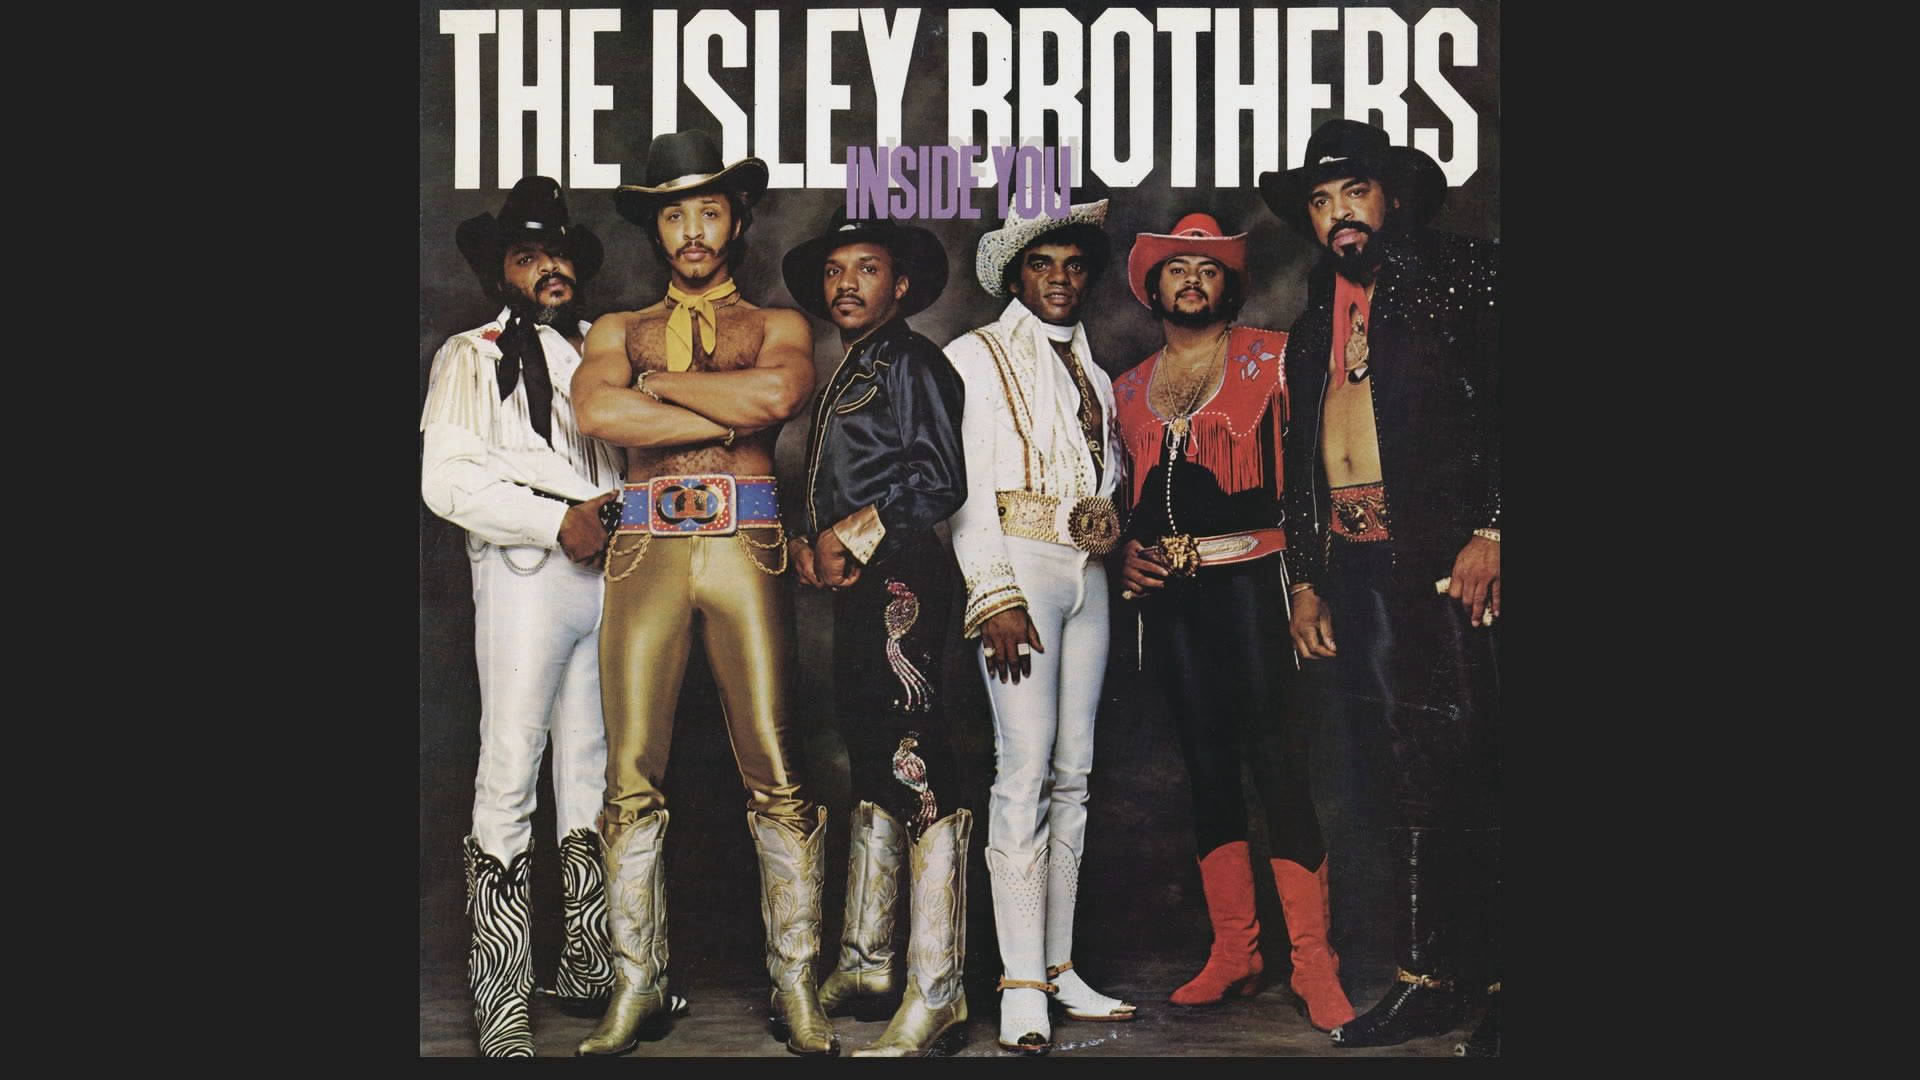 Det Isley Brothers Inside You Album Cover Wallpaper. Wallpaper